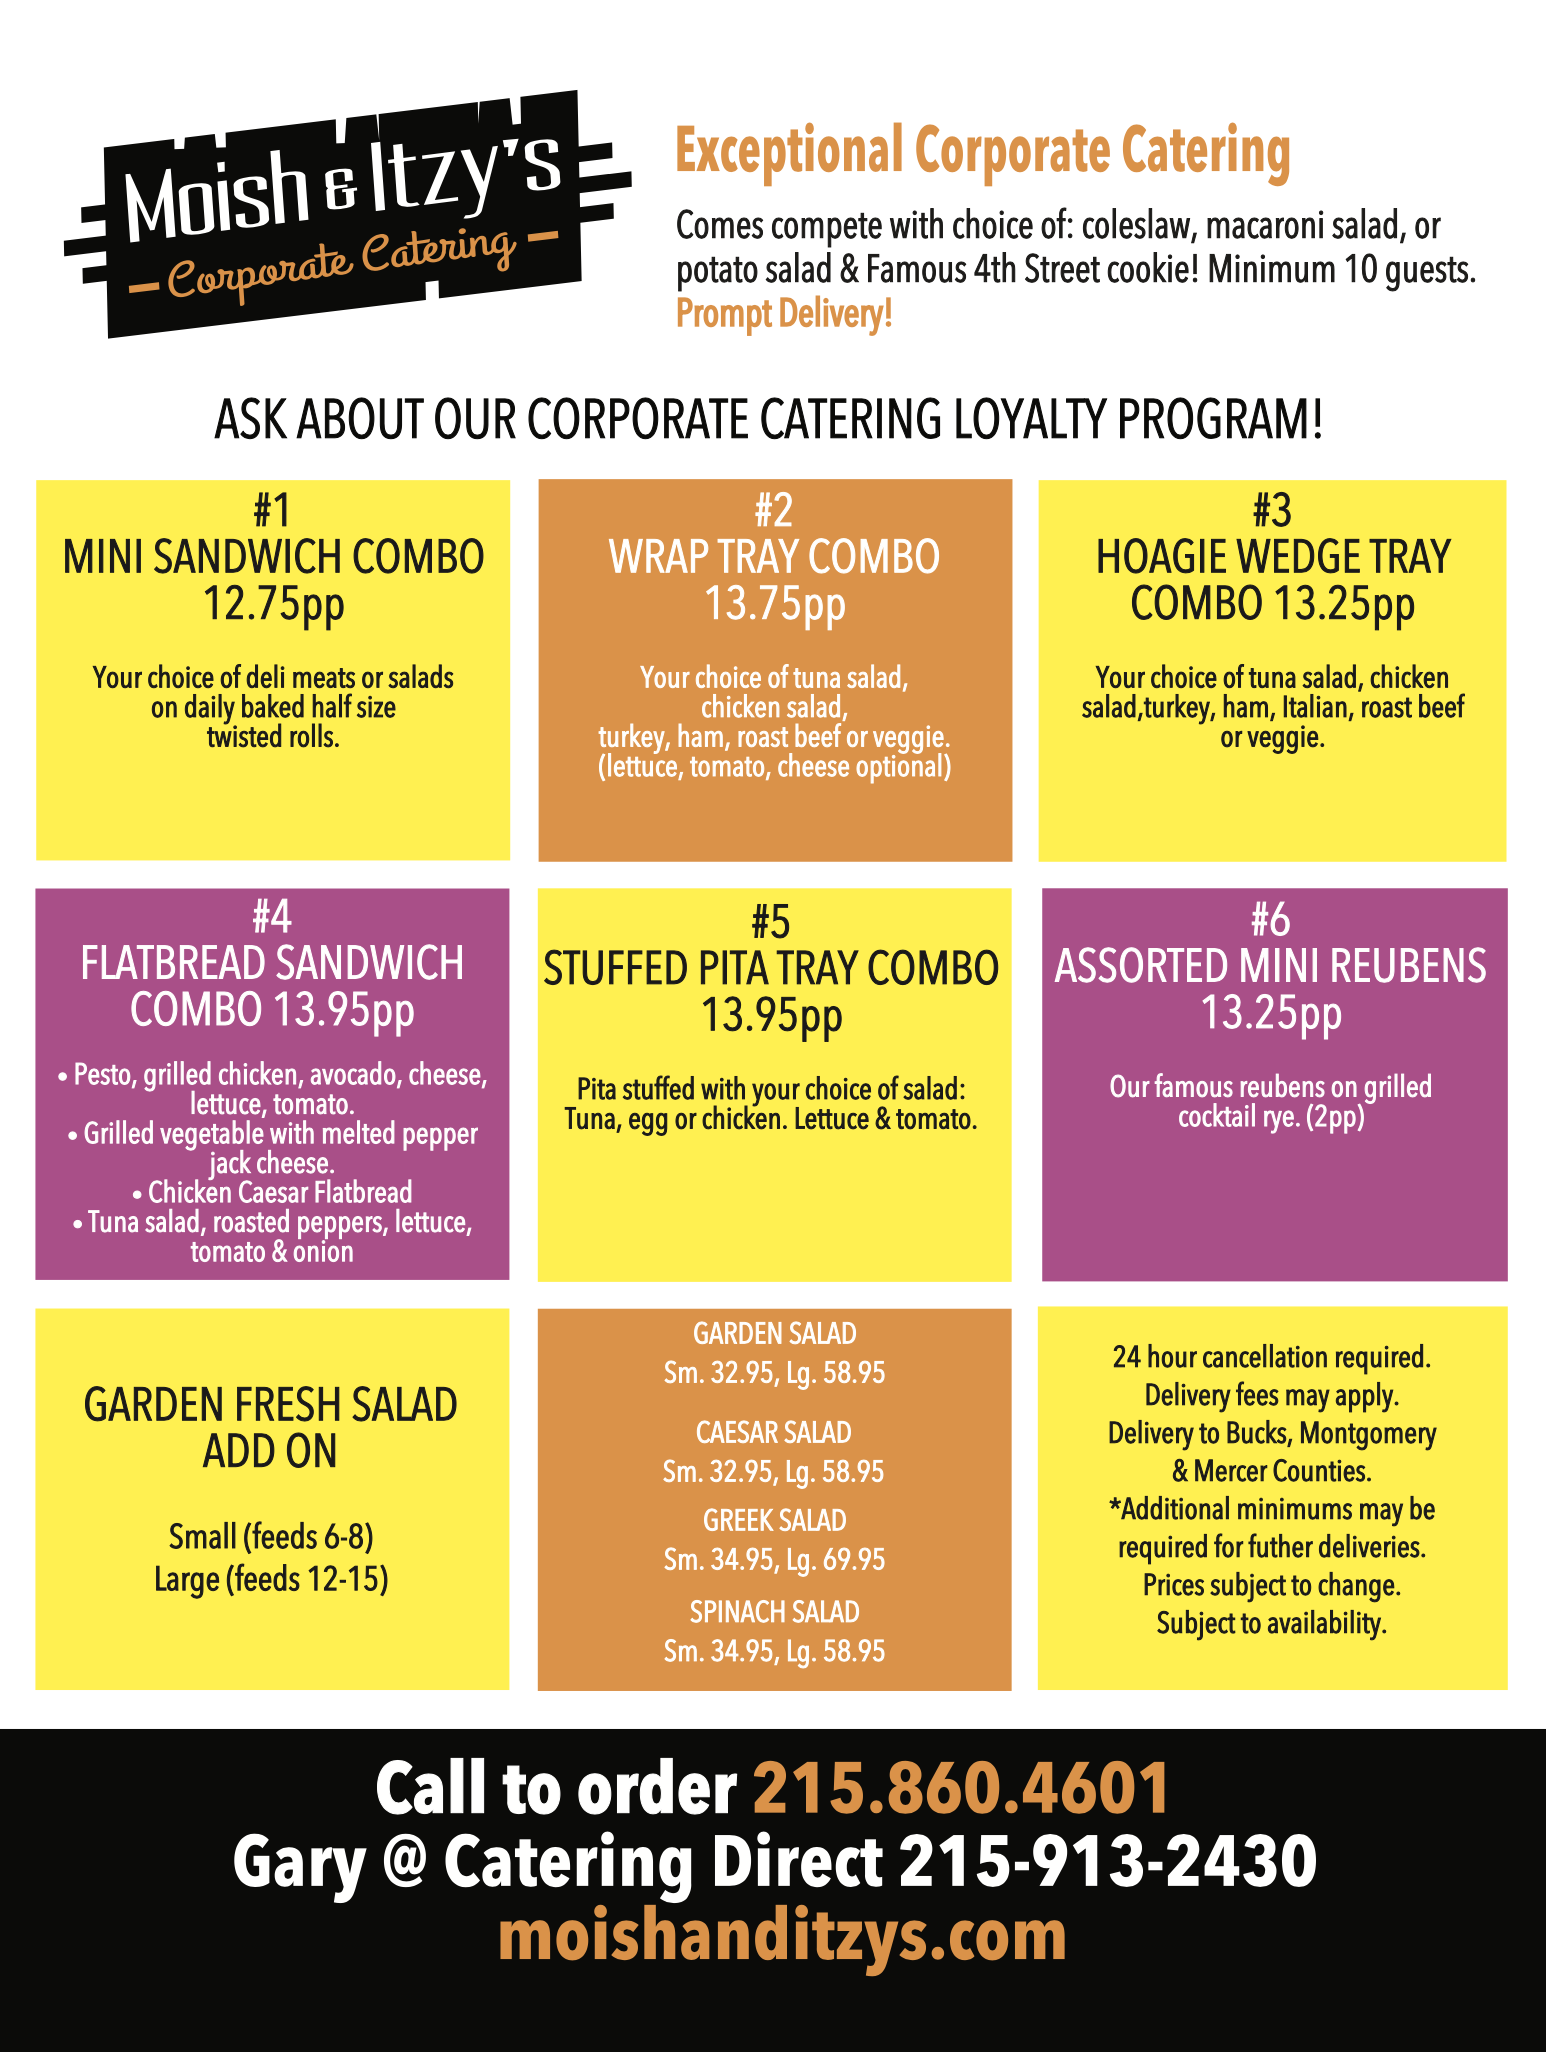 View Our Corporate Catering Menu